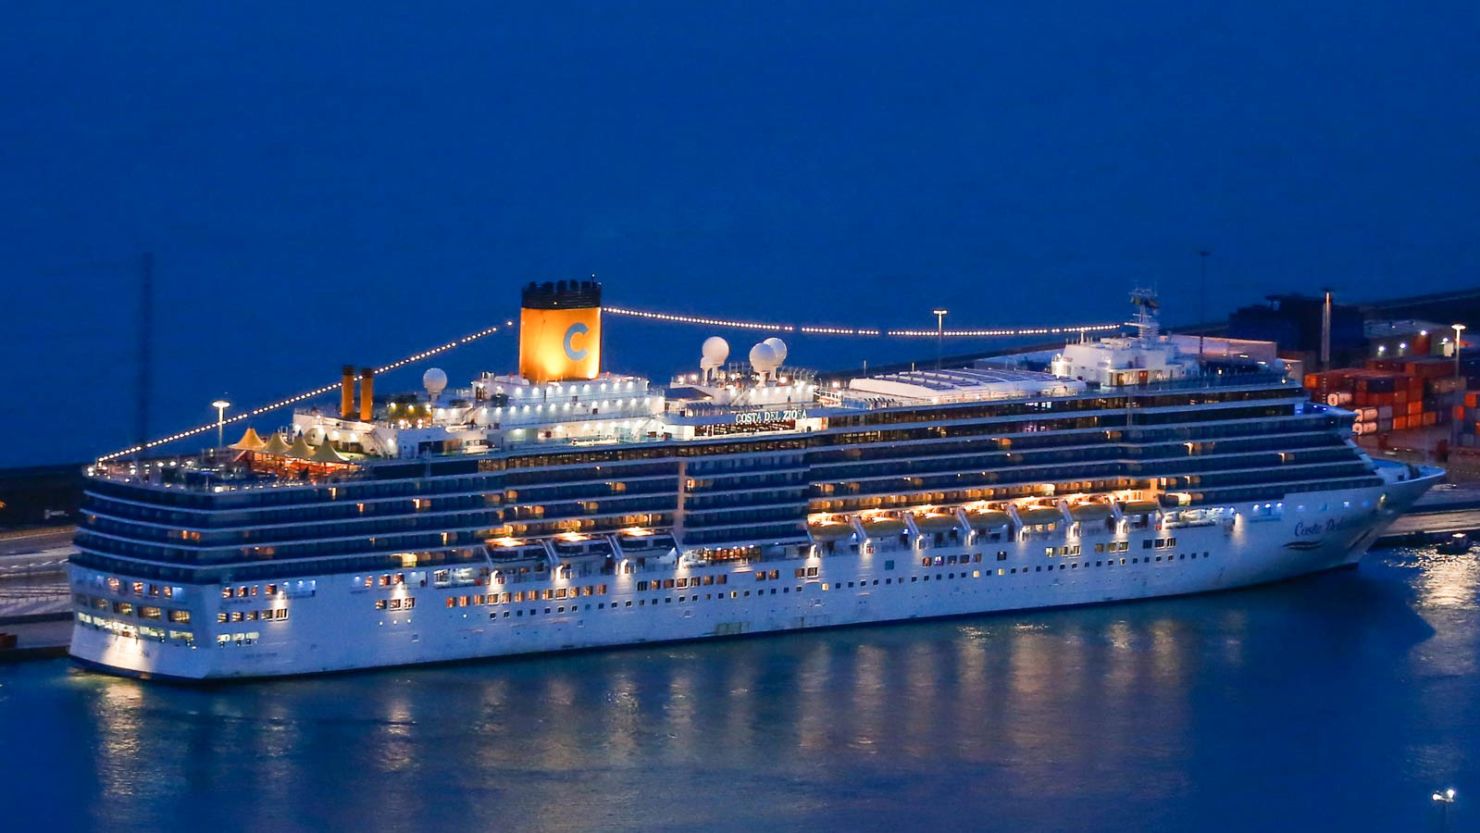 The Costa Deliziosa embarked from Venice in January on what was intended to be a 113-day cruise.